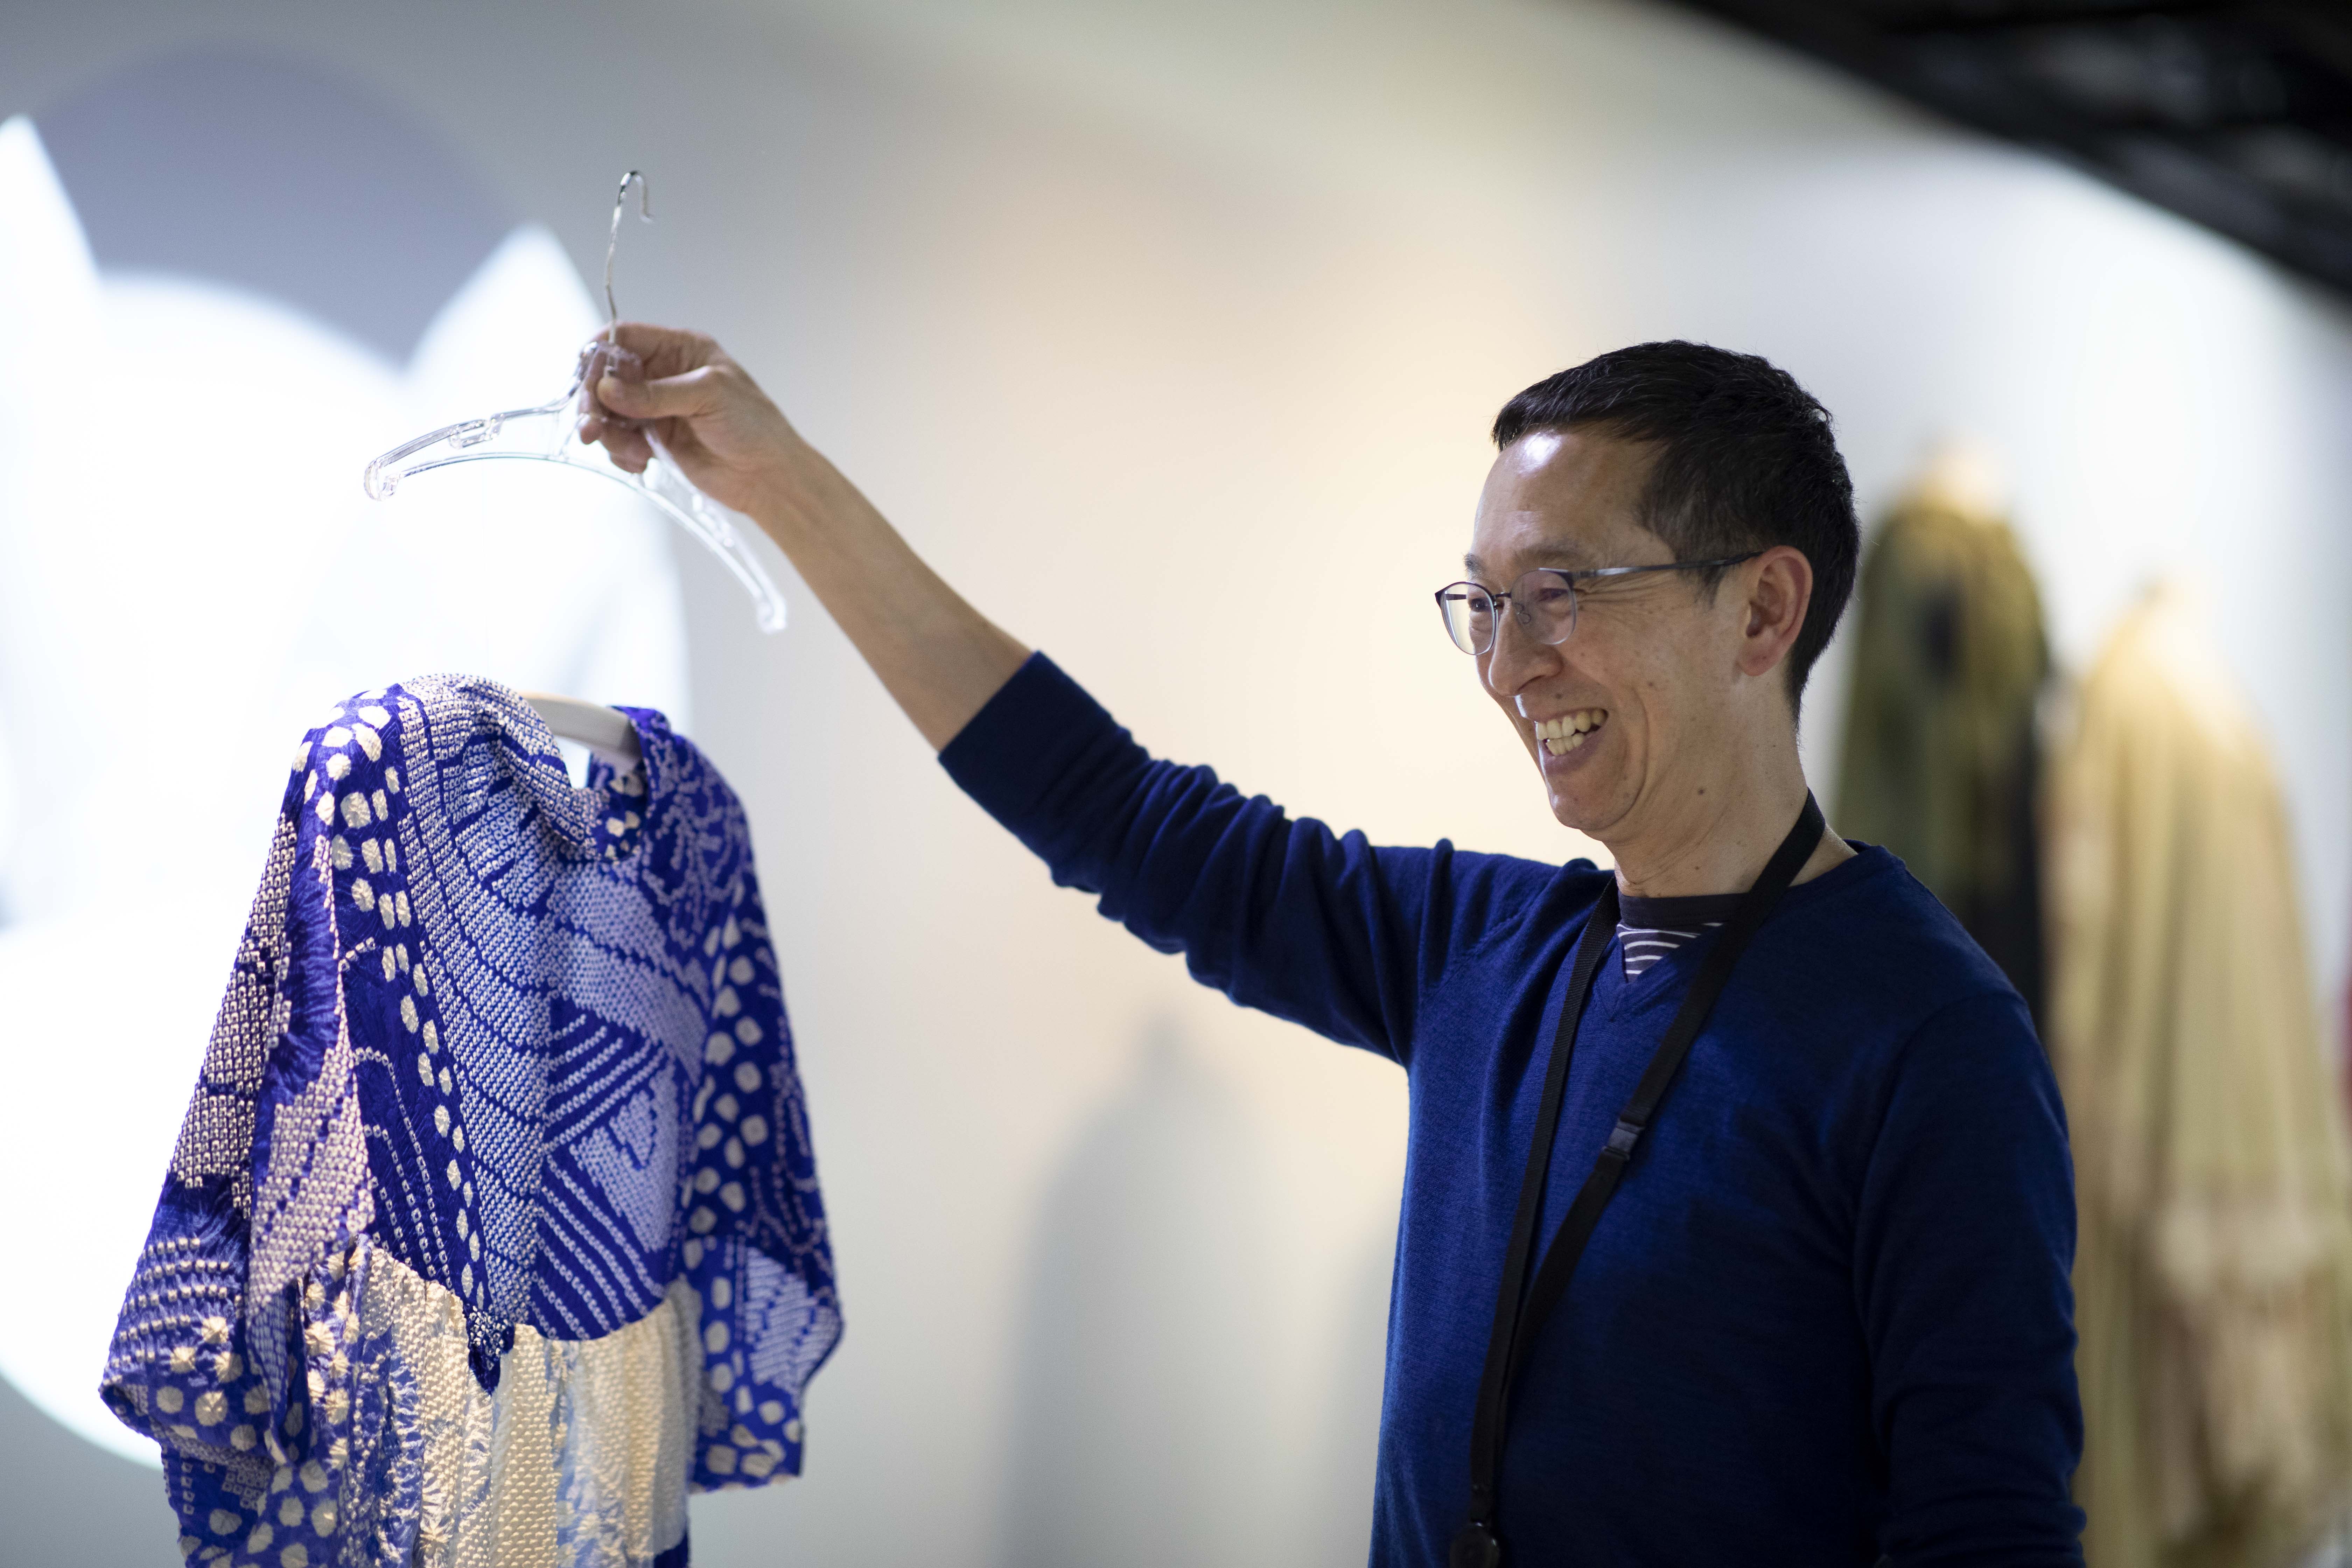 A man holding a coathanger from which drapes a blue and white patterned silk top. The man has a broad smile.